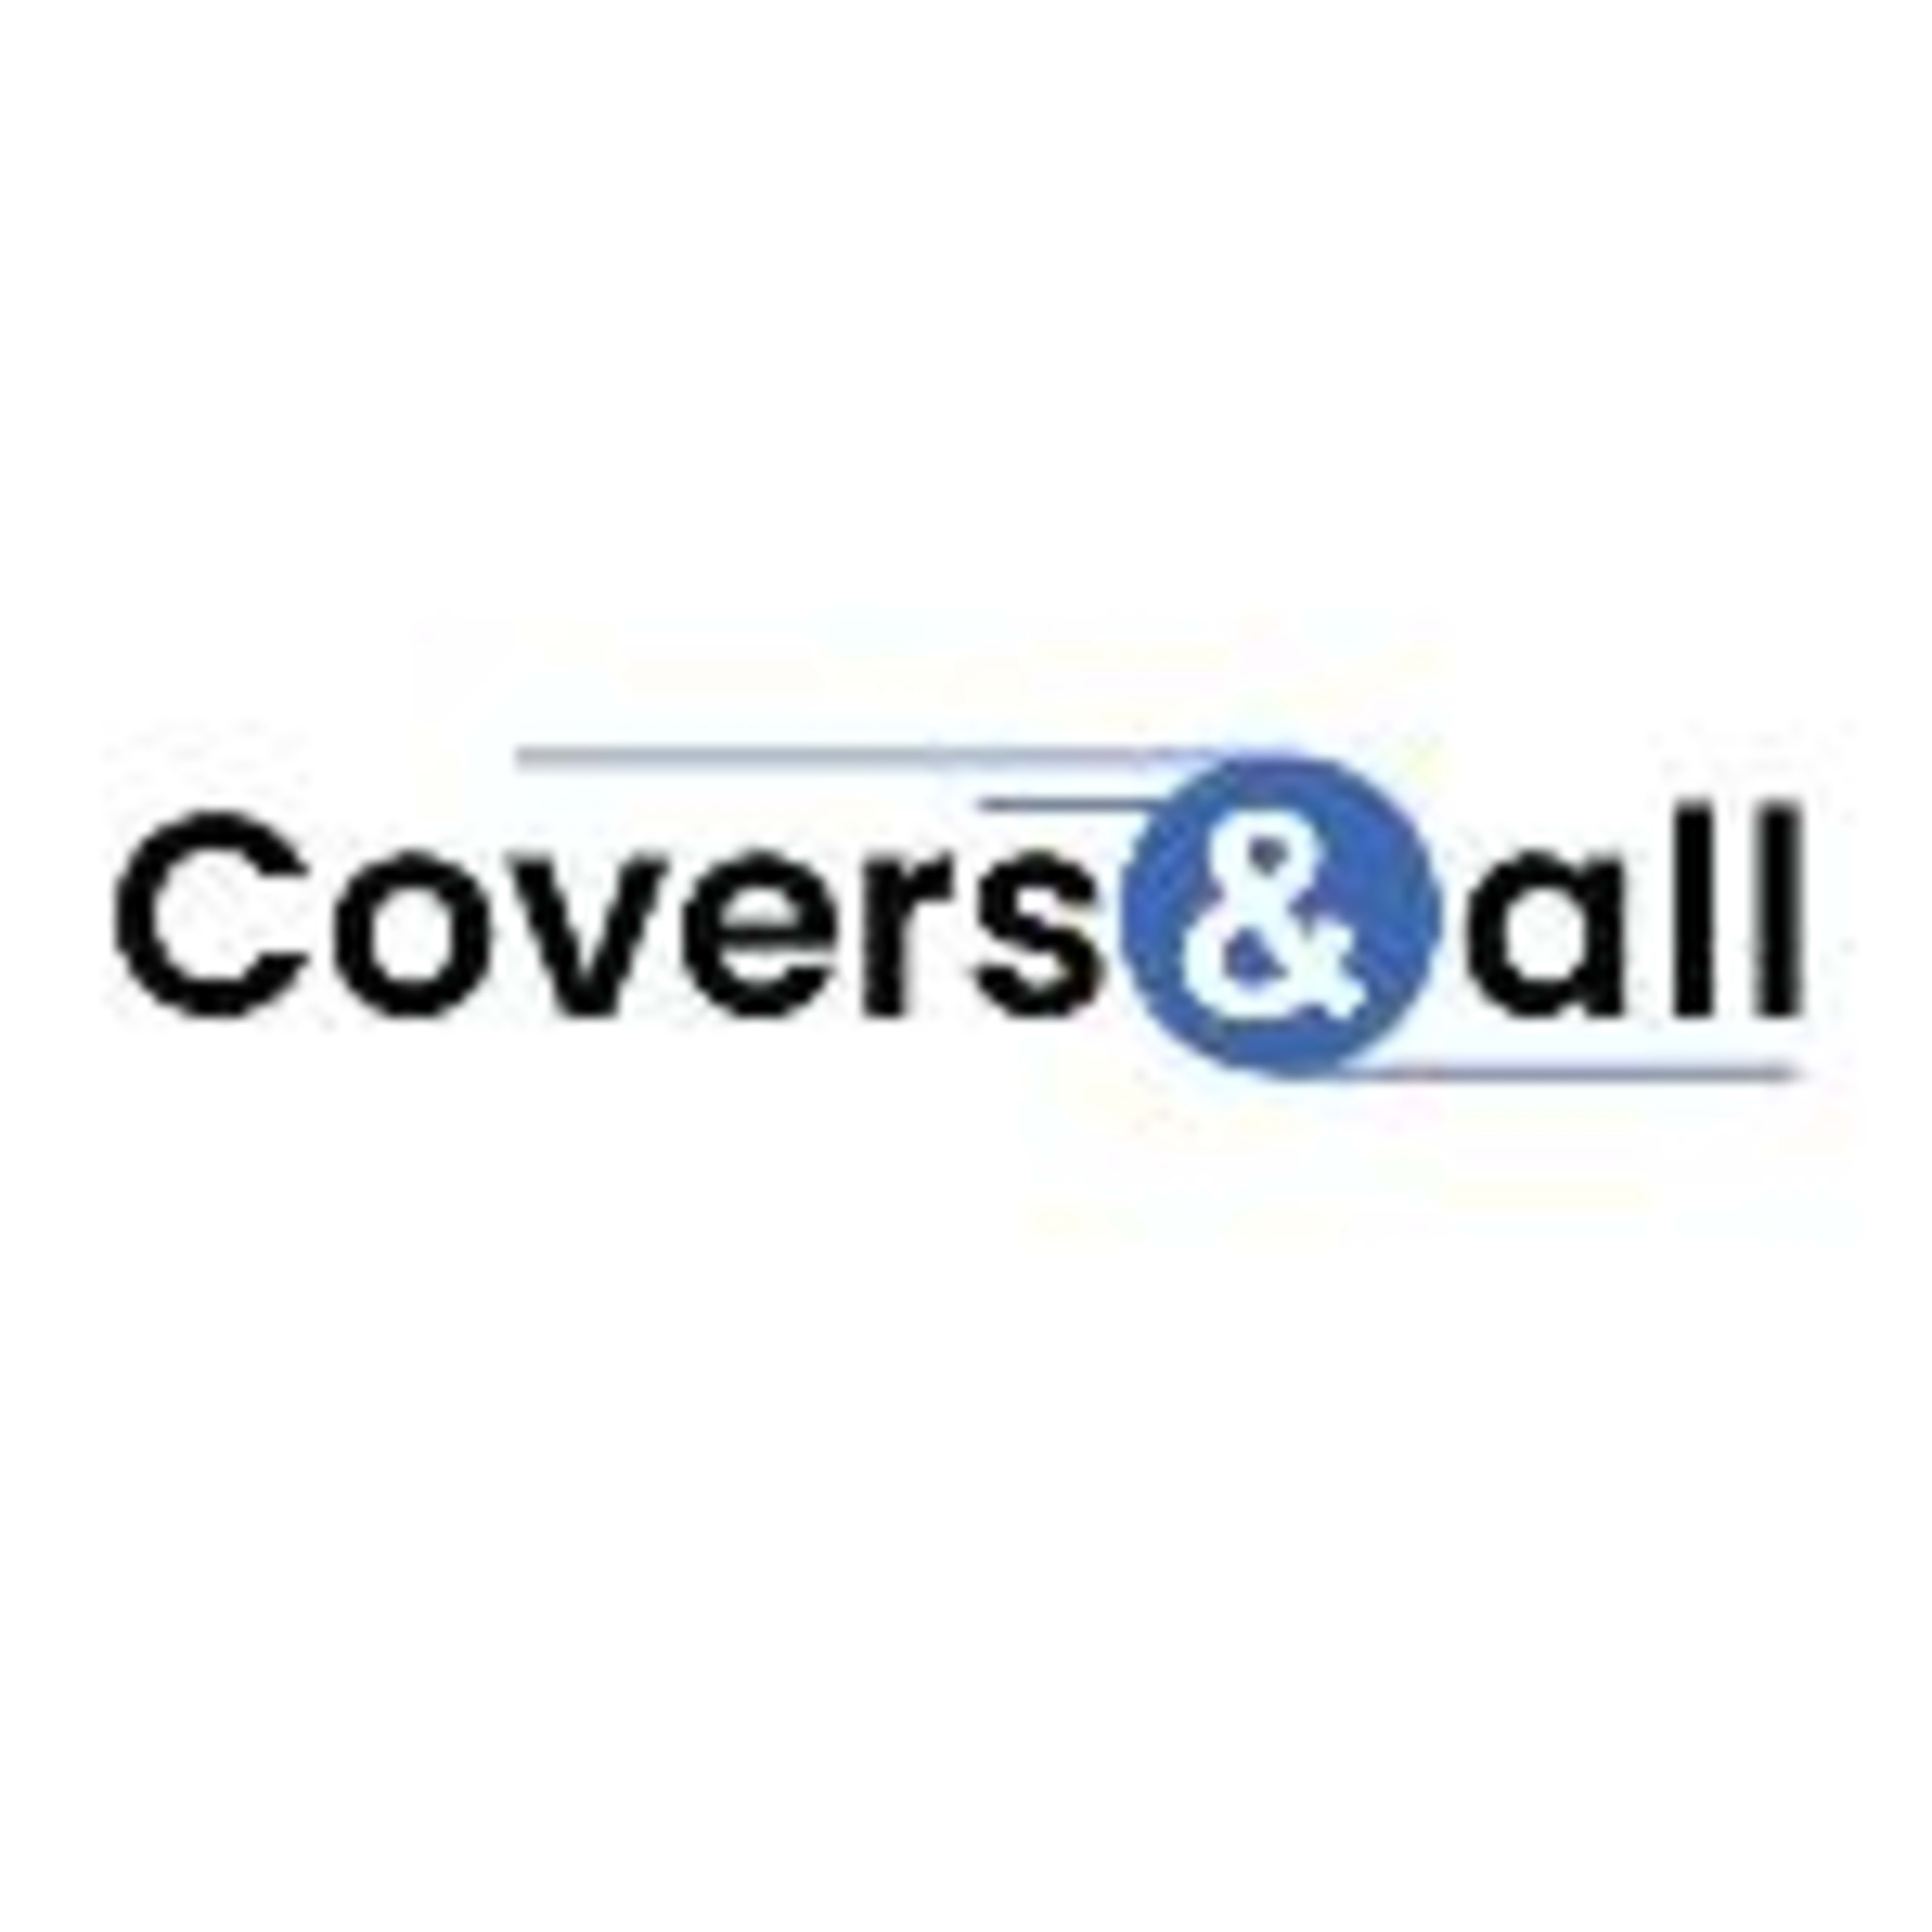 Covers And All Code